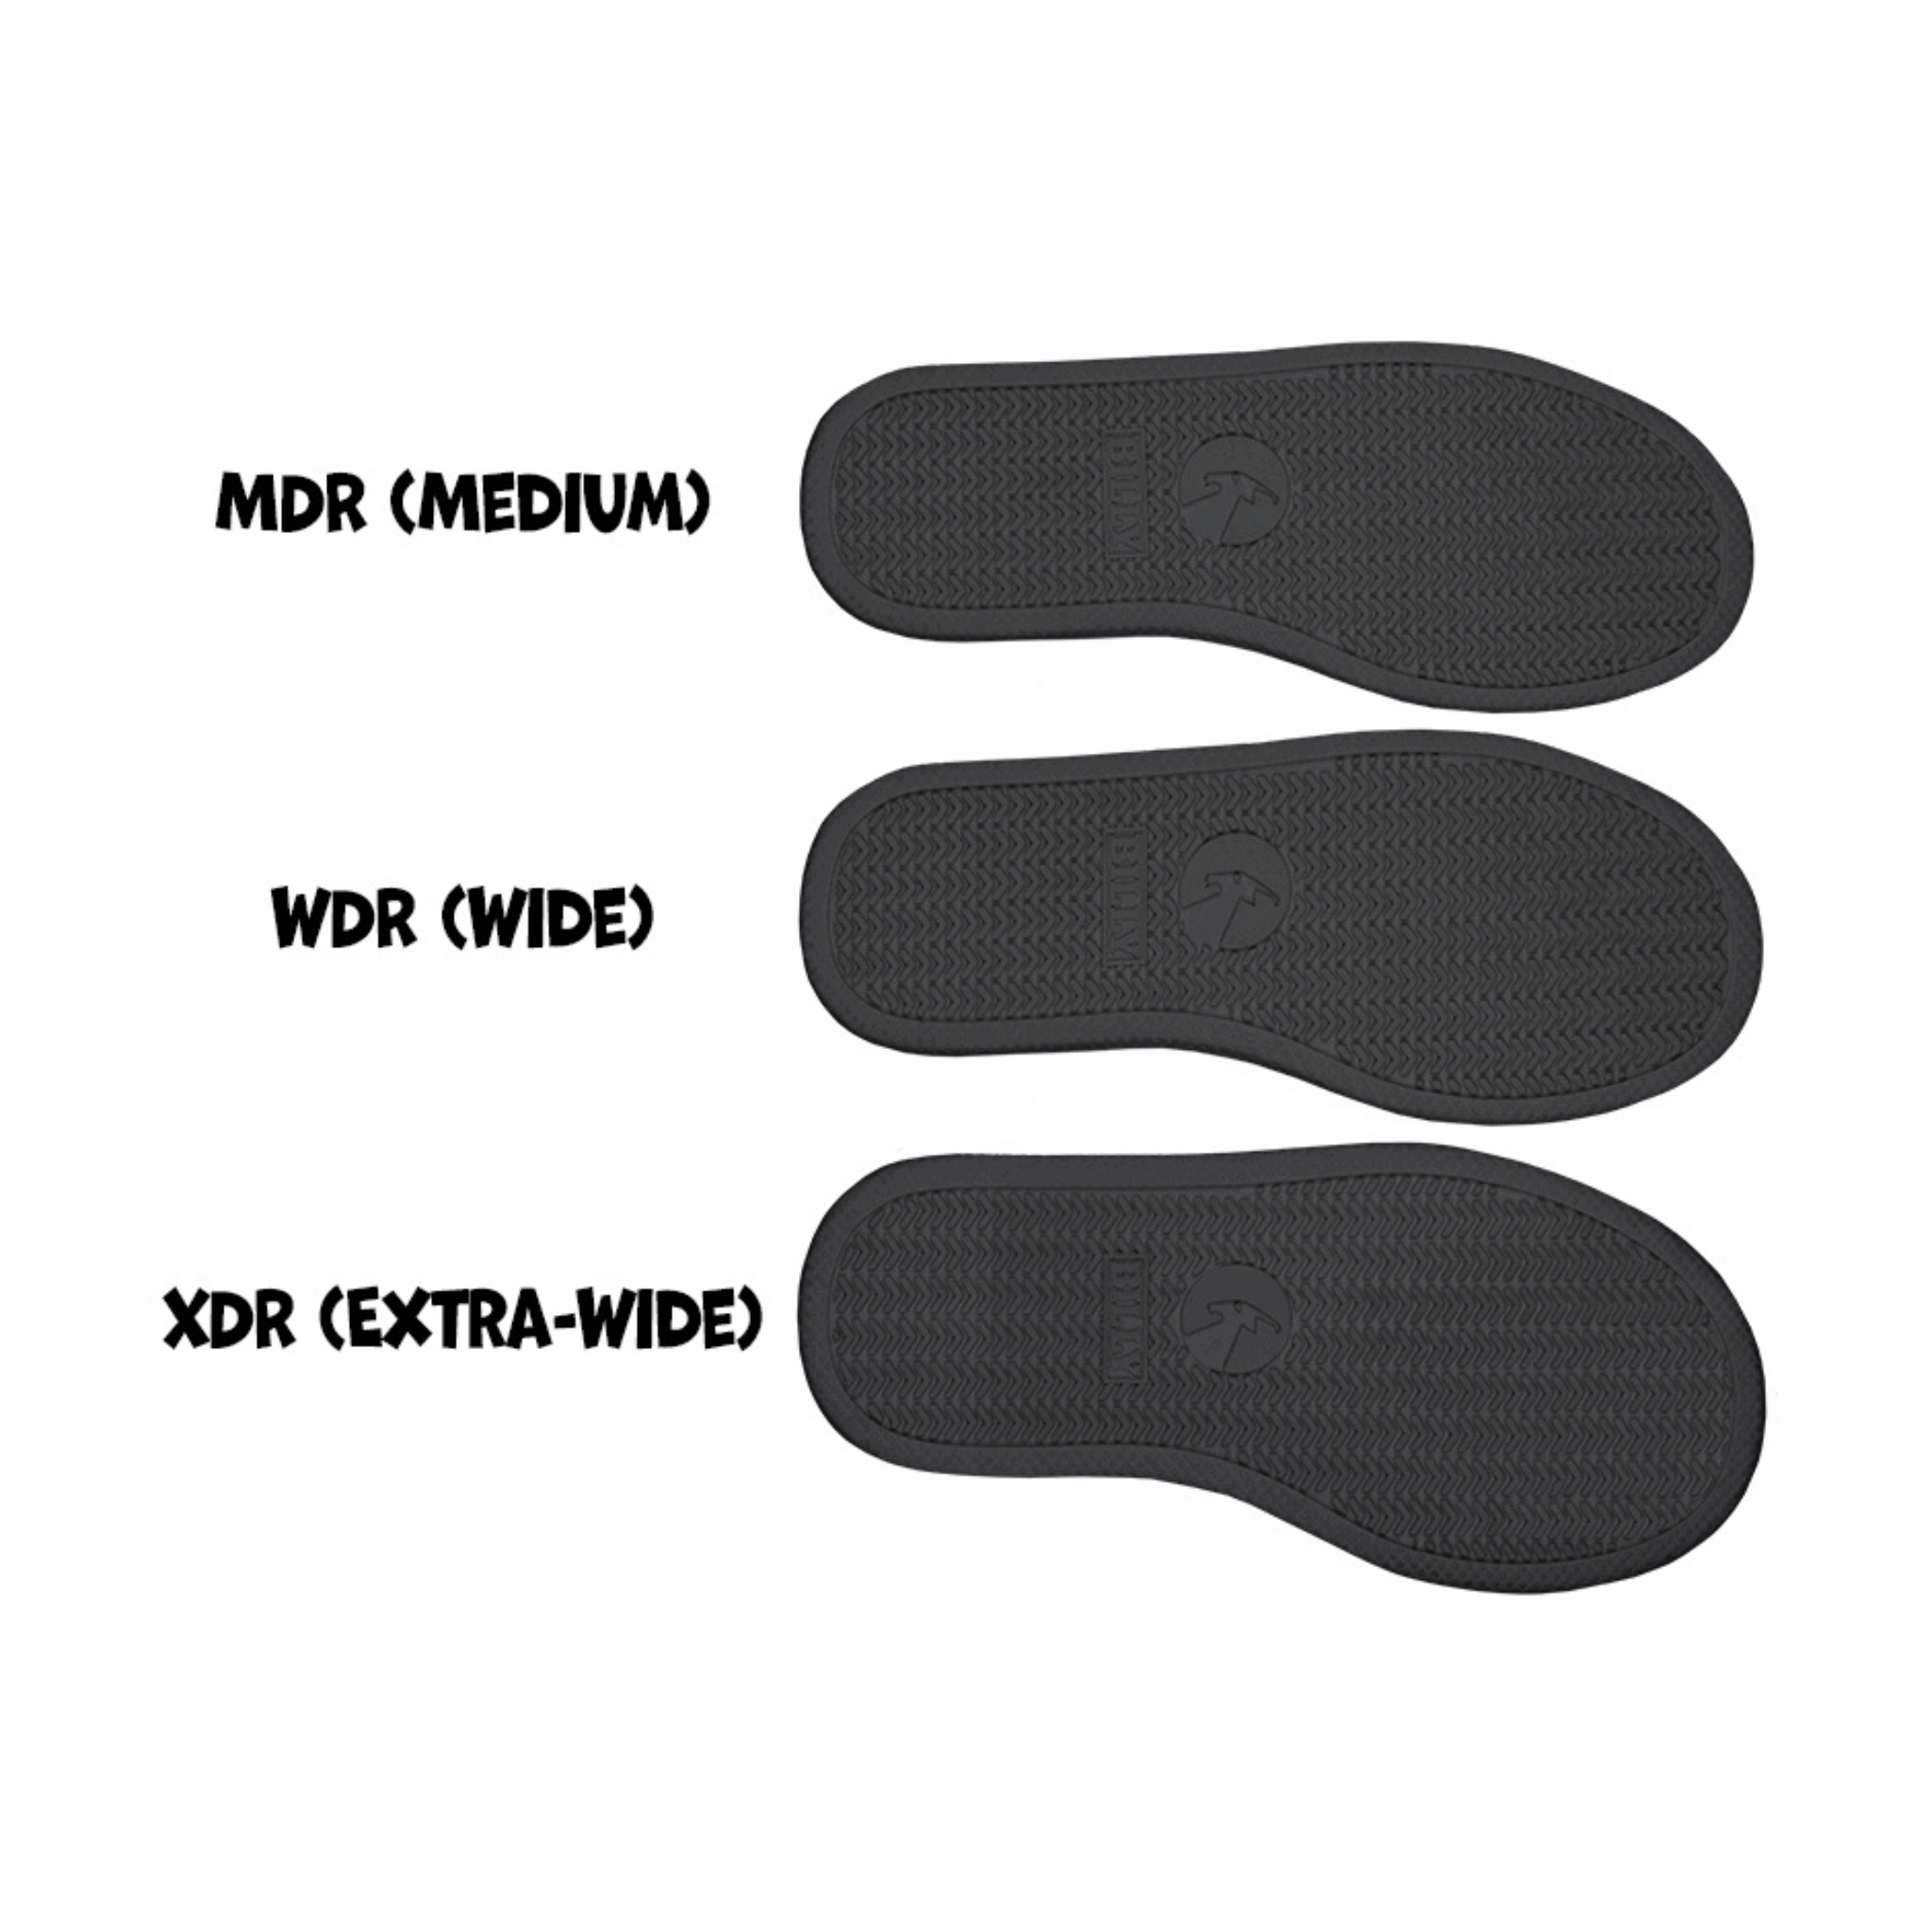 Image of the three sole size comparisons in the Billy D|R range. MDR (standard), WDR (wide) & XDR (extra wide)